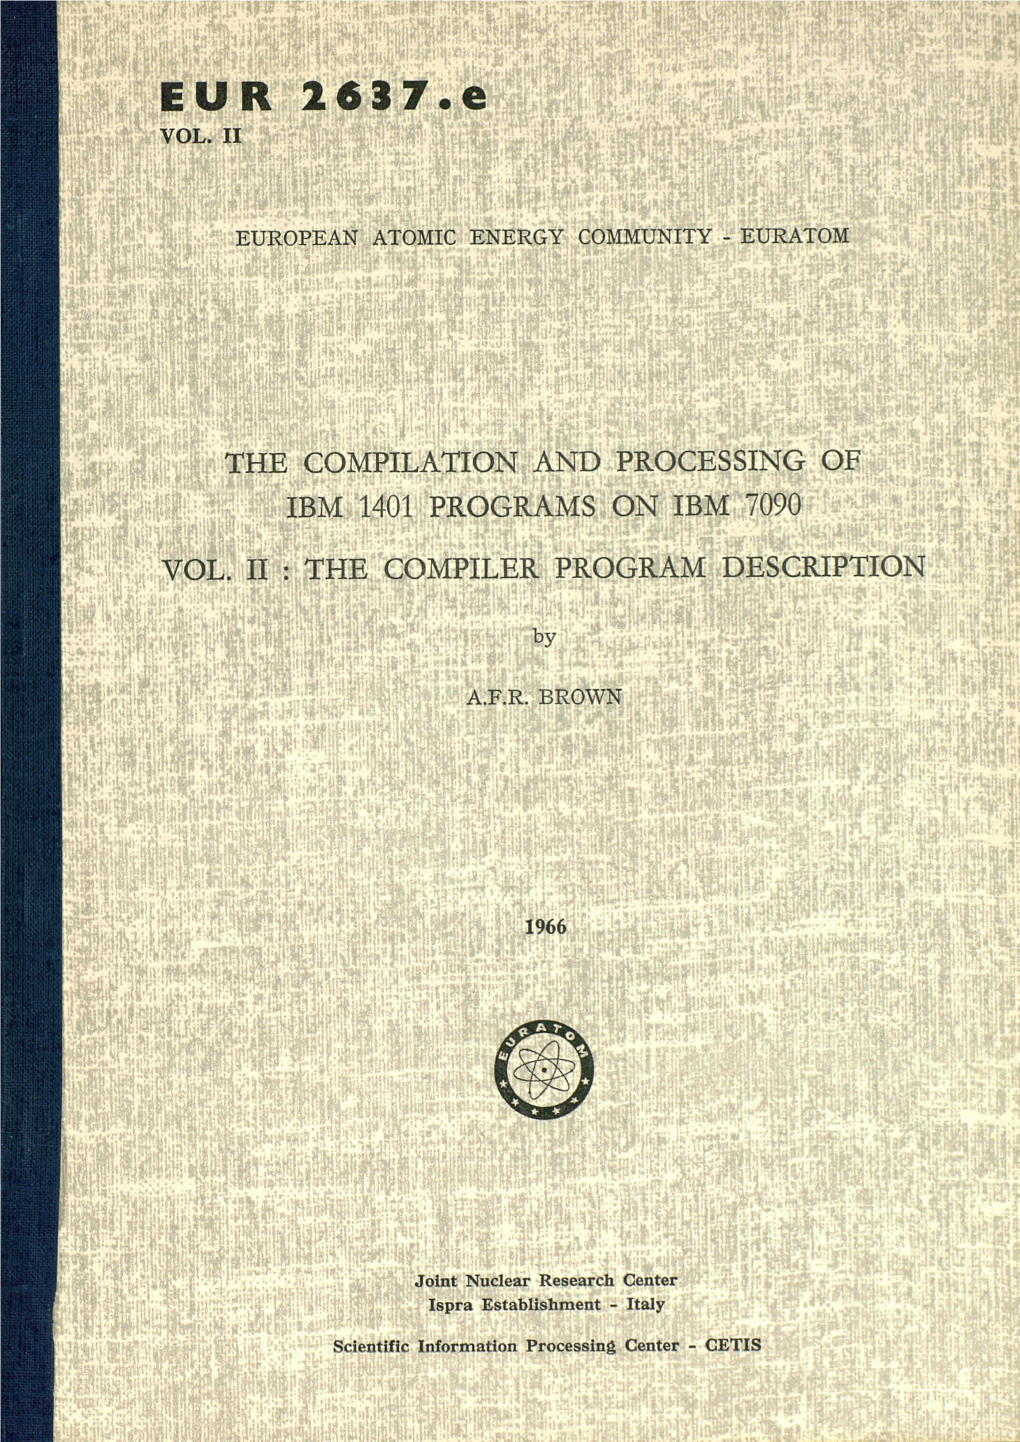 The Compilation and Processing of Ibm 1401 Programs on Ibm 7090 Vol